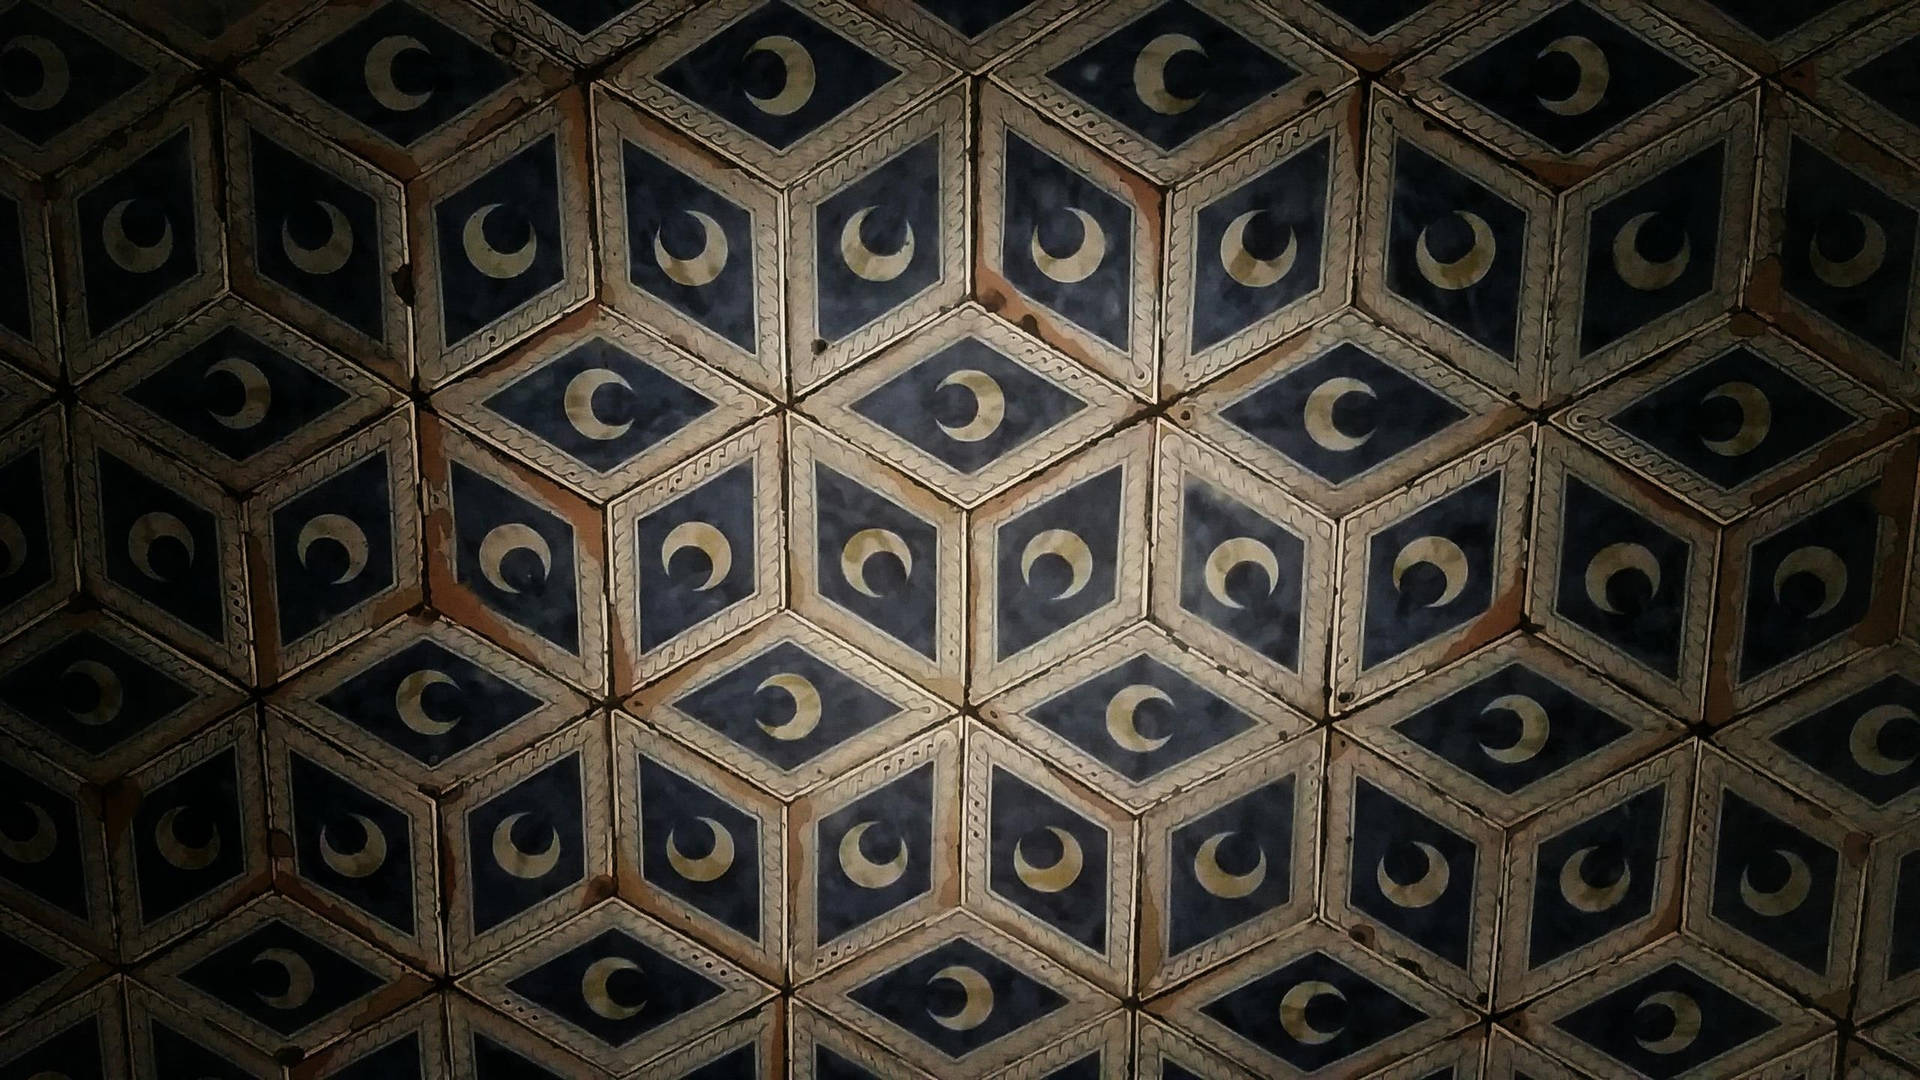 Siena Cathedral Floor Tiles Picture